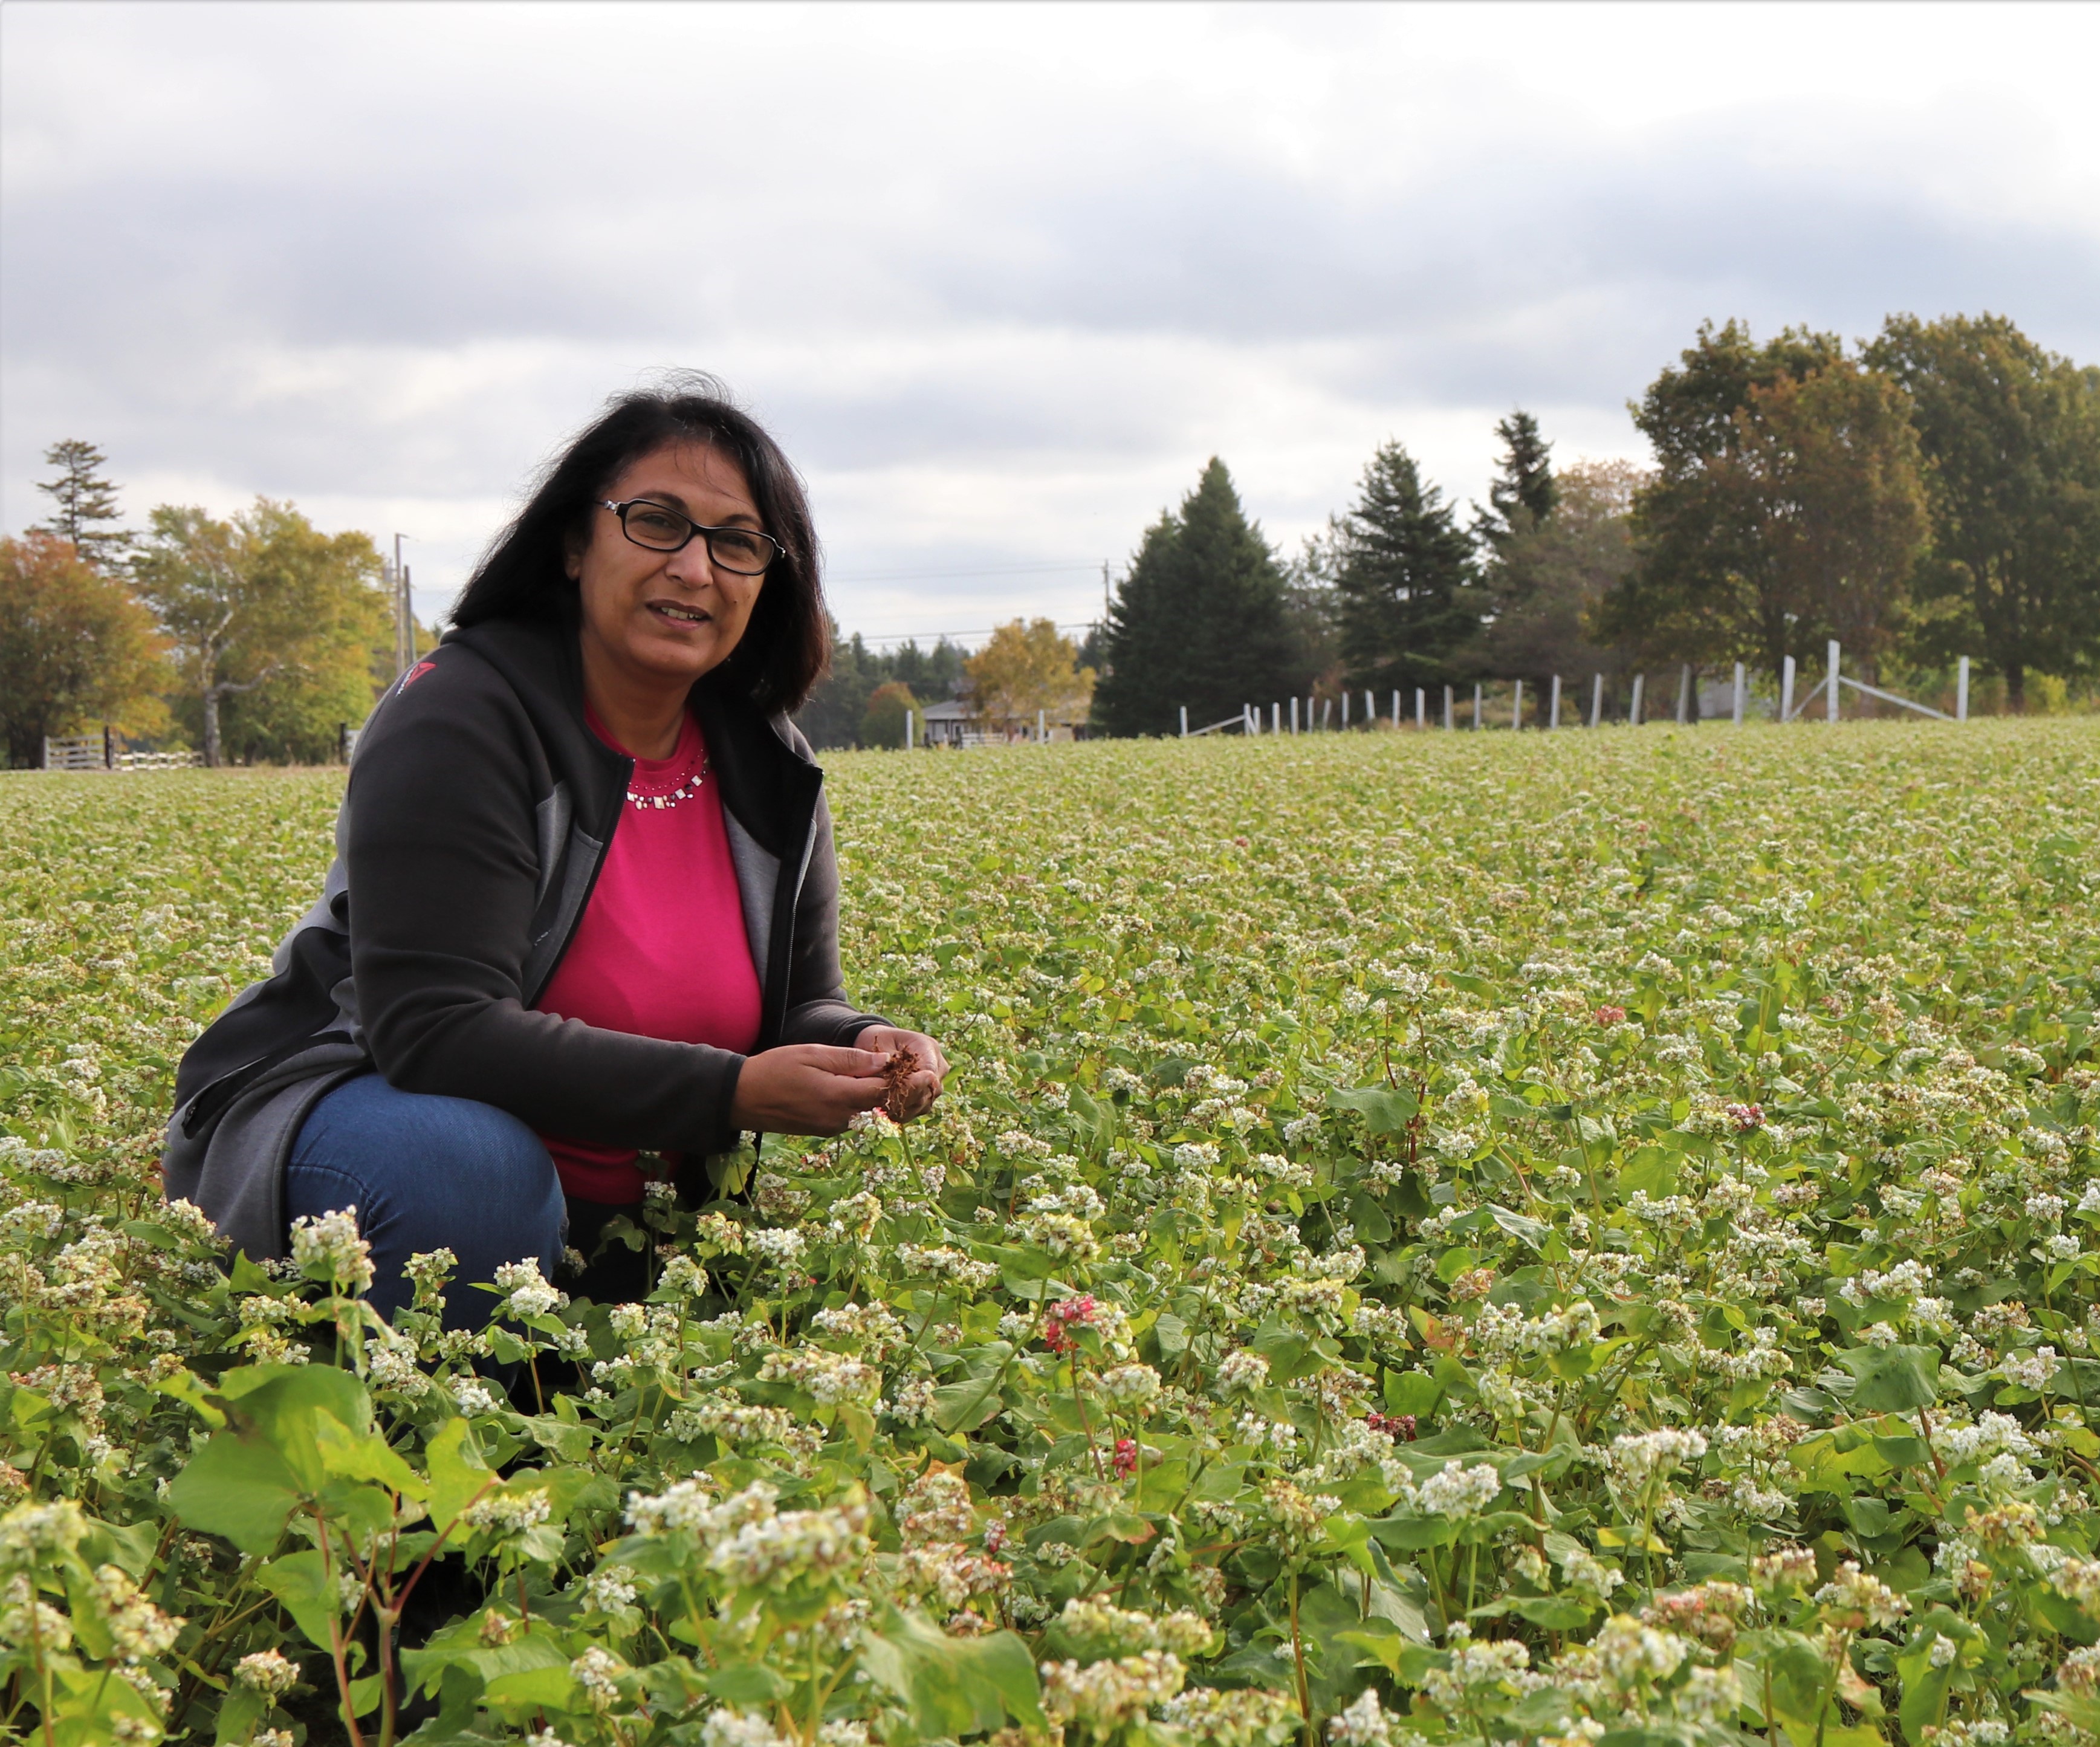 Photo 1: A scientist kneeling and smiling in an outdoor field of buckwheat crops.